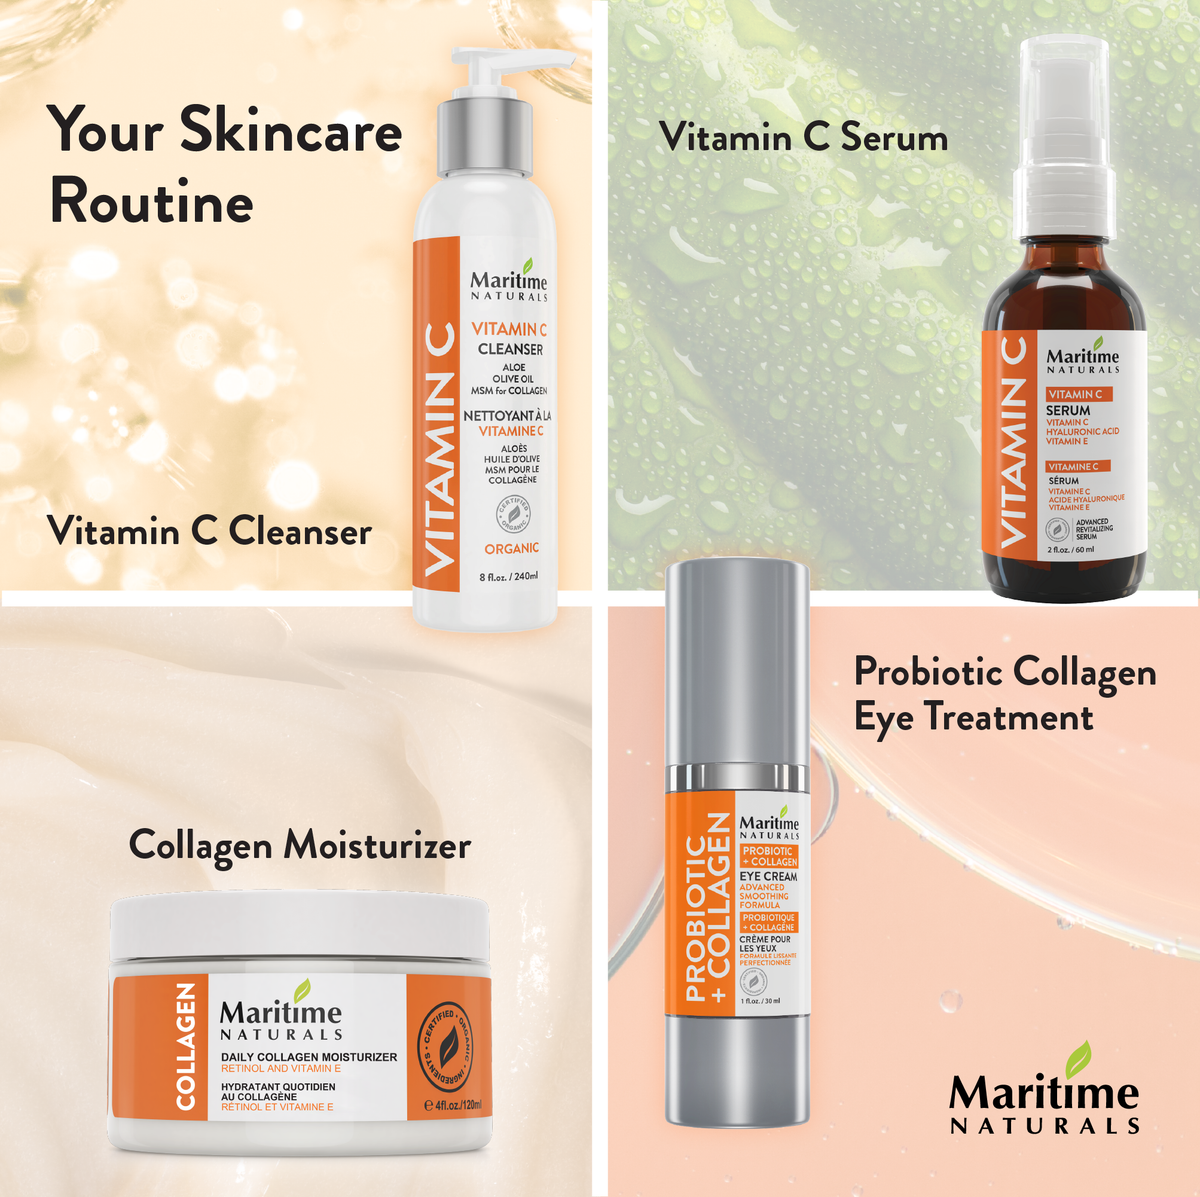 Martime Naturals skincare routine for aging skin natural products 